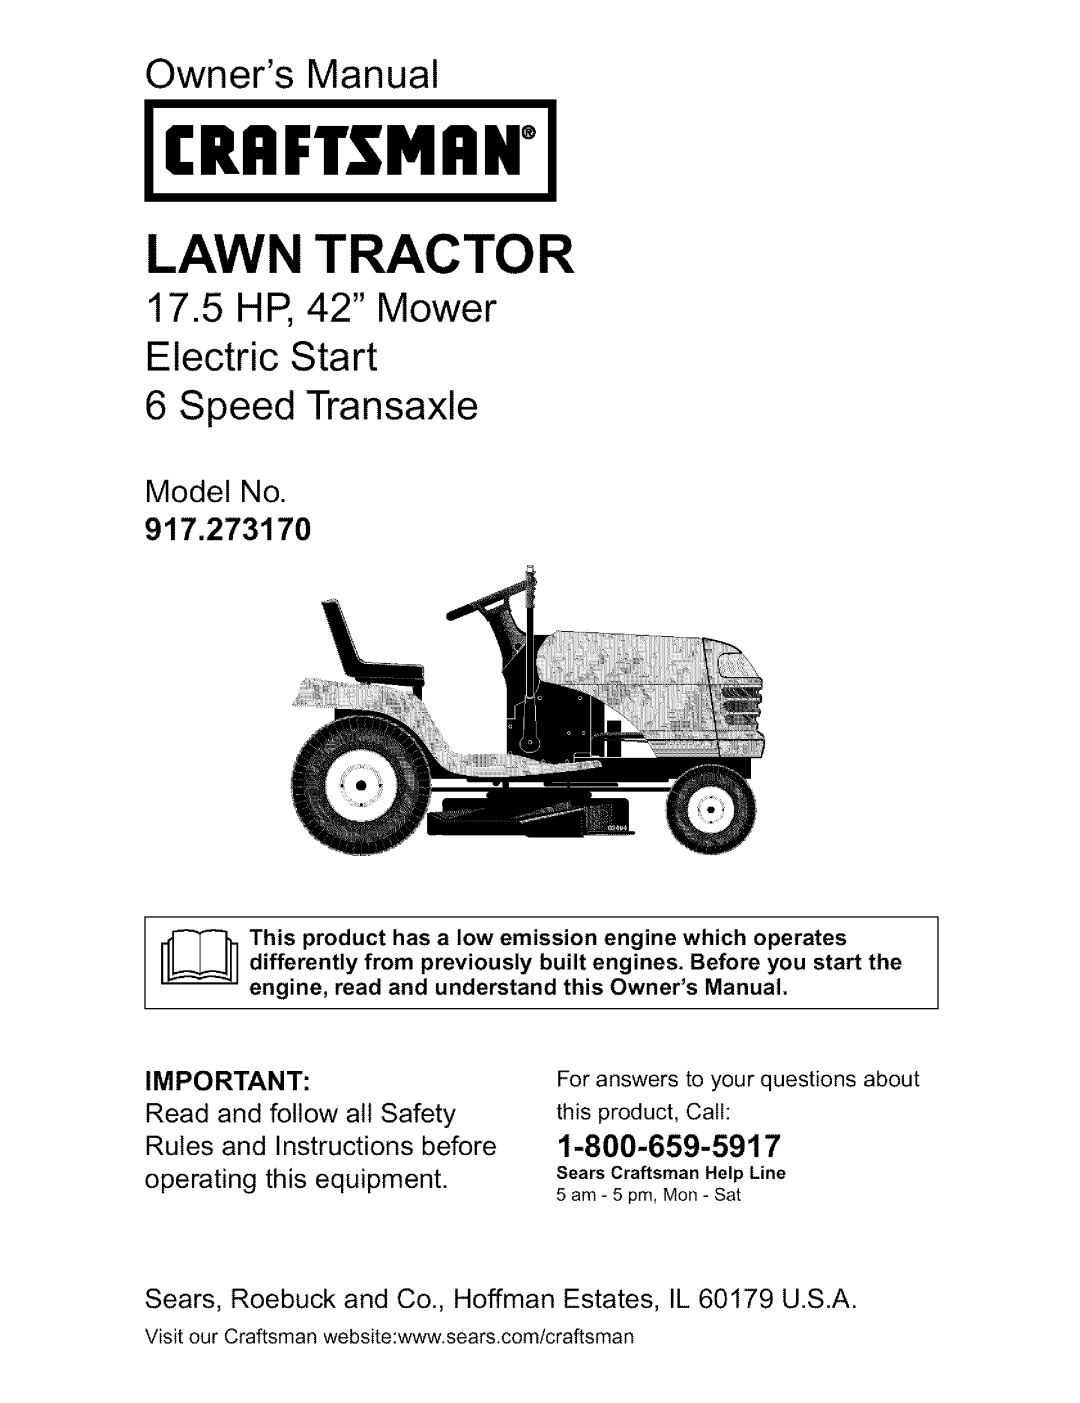 Craftsman 917.27317 owner manual 17.5HP, 42 Mower Electric Start, Model No, Jcriiftsmiinj, Lawn Tractor, Owners Manual 